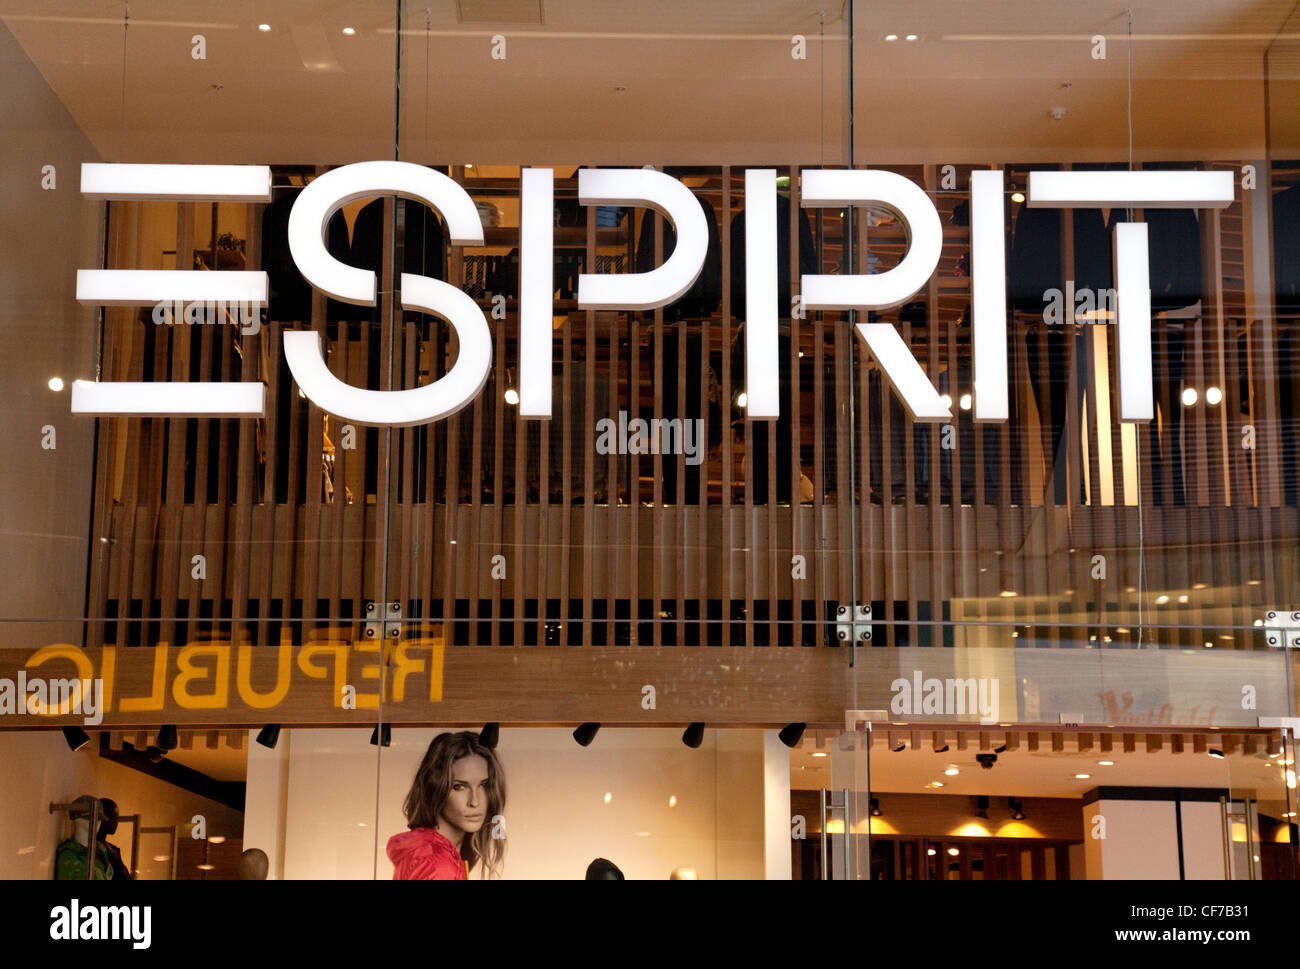 Esprit shop hi-res stock photography and images - Alamy